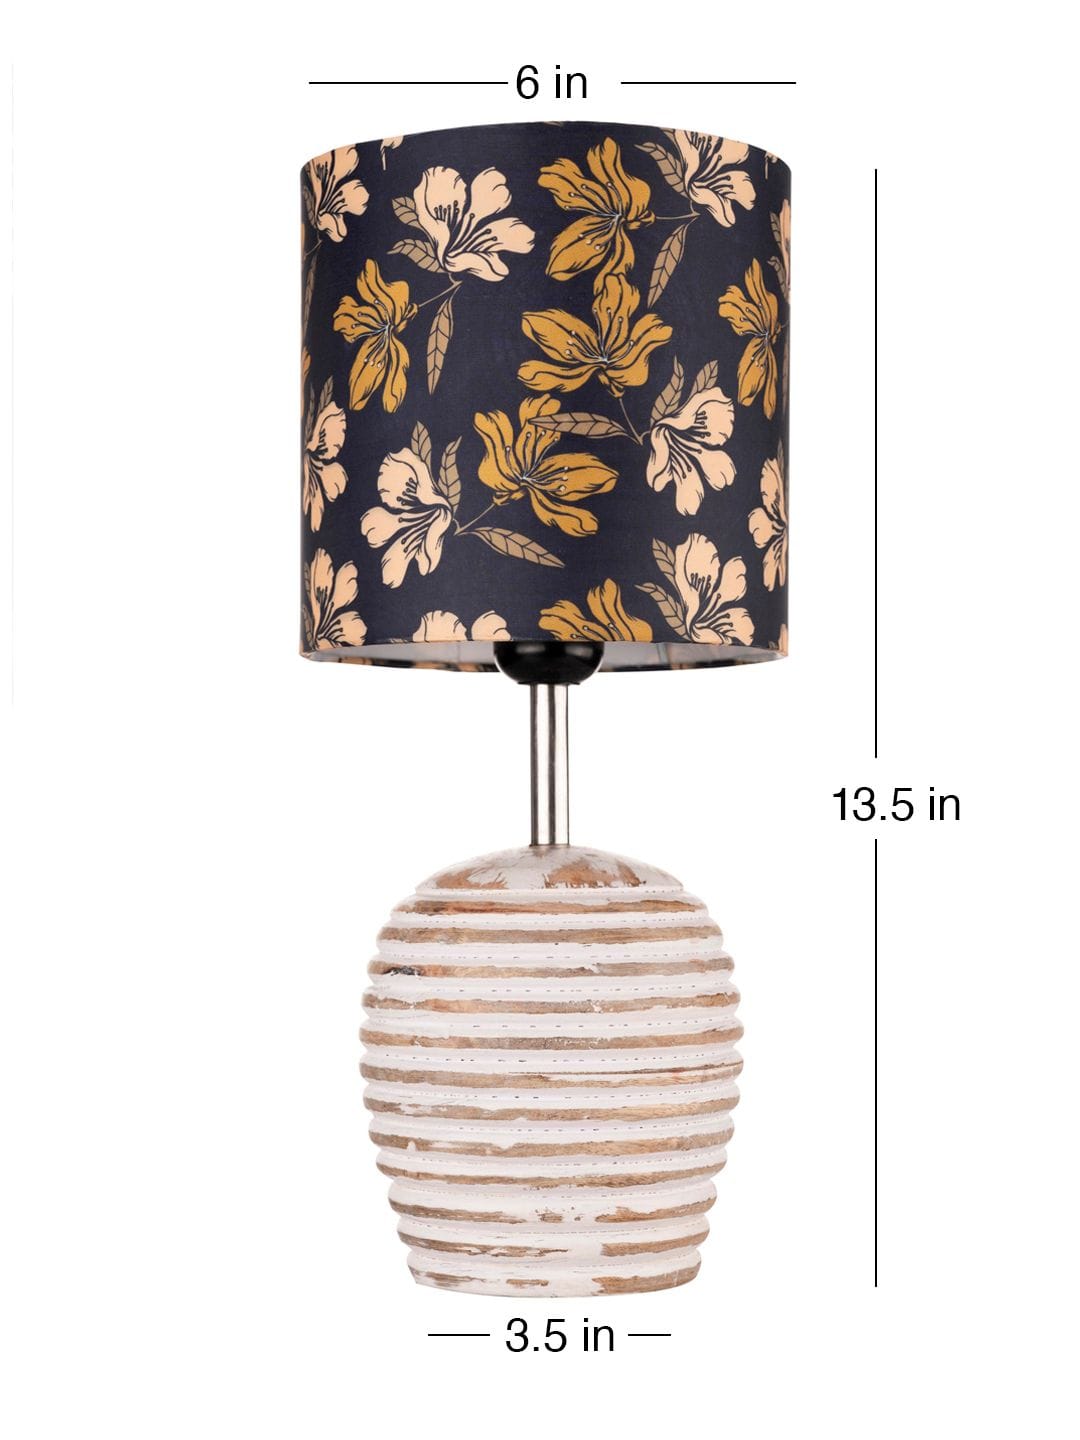 Stripped Distress White Lamp with Black Floral multicolor shade